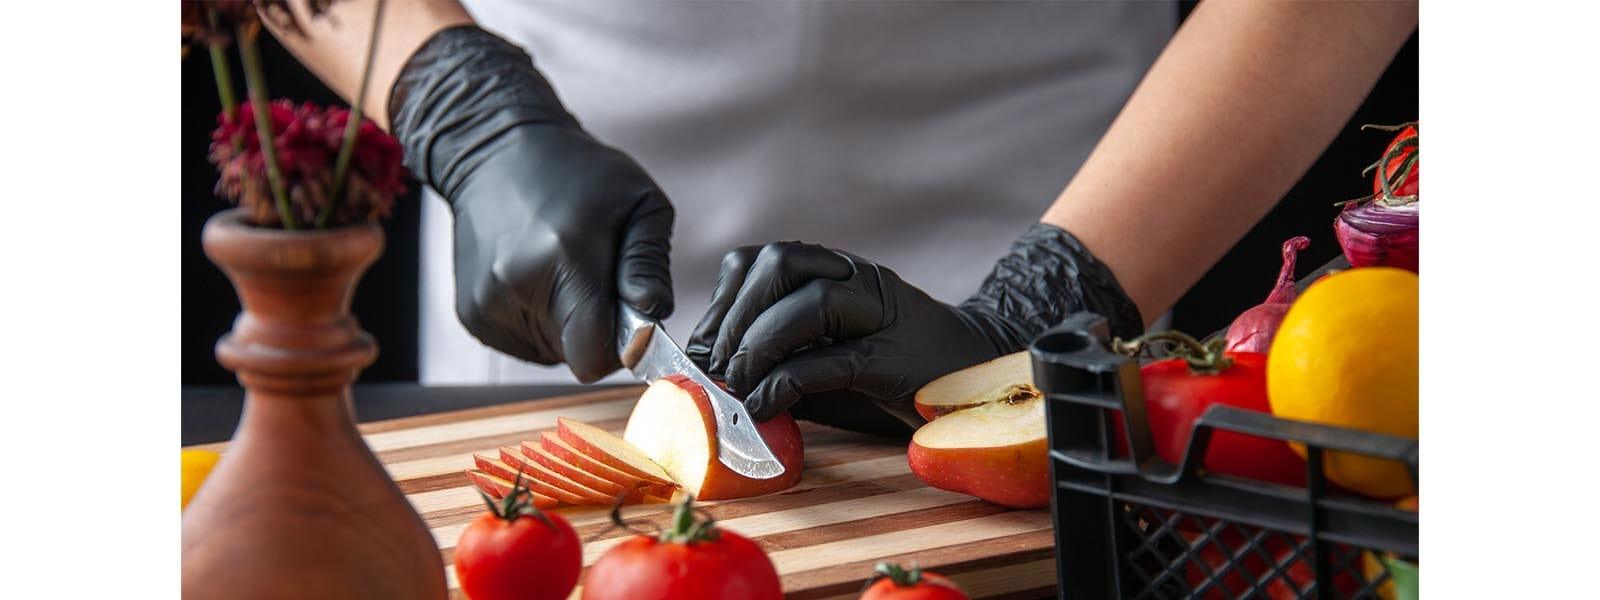 Should Chefs Wear Disposable Gloves?